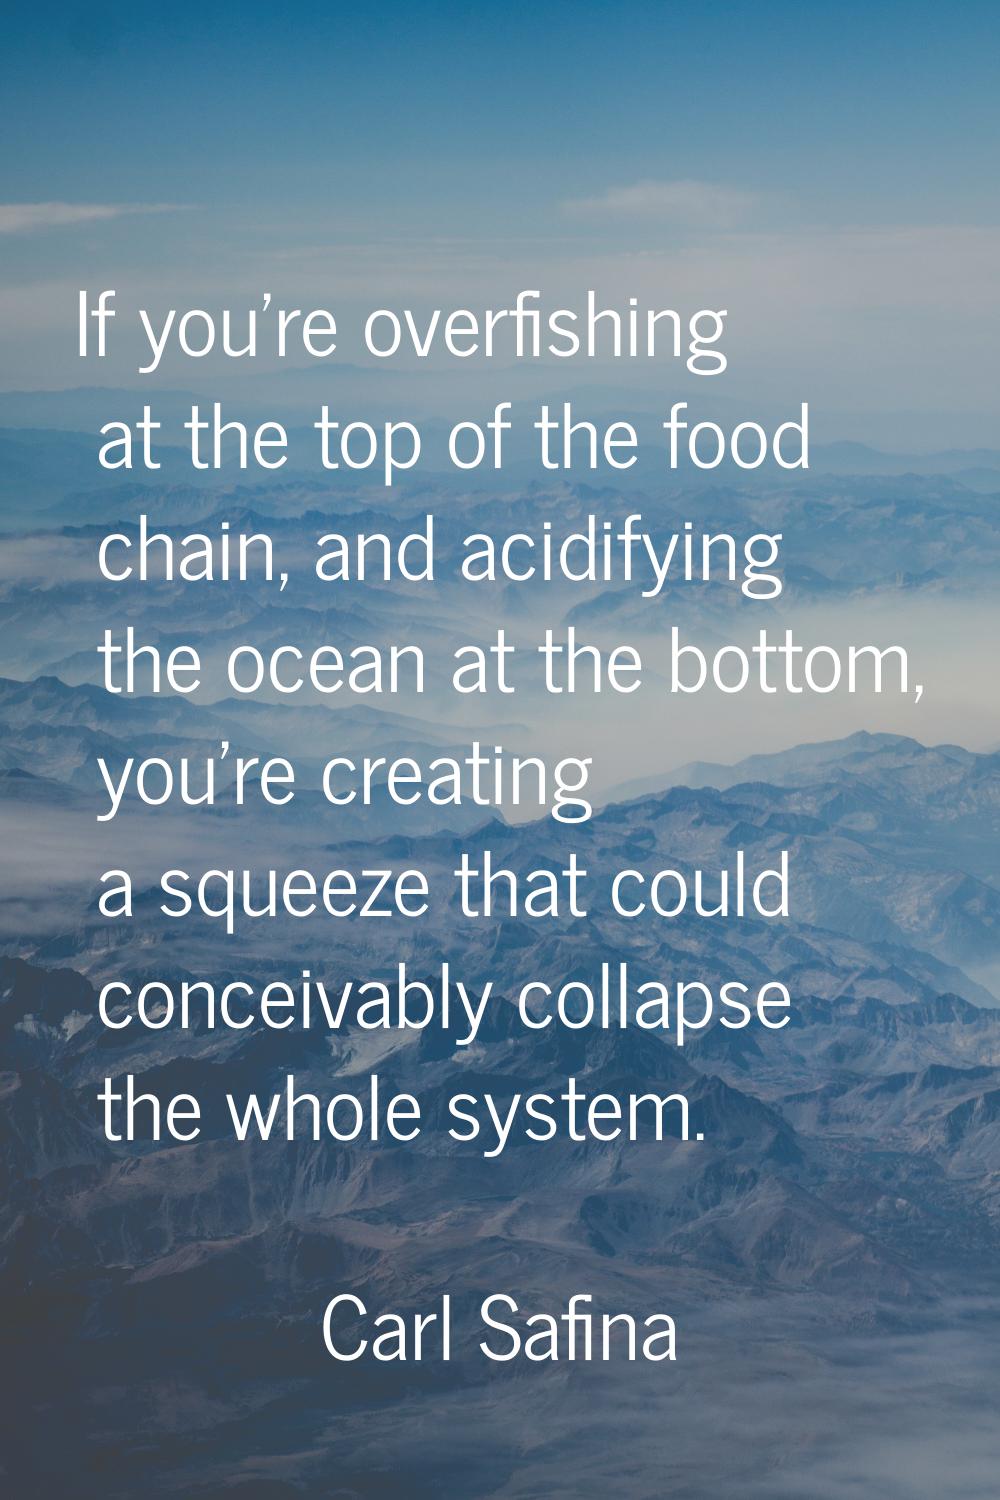 If you're overfishing at the top of the food chain, and acidifying the ocean at the bottom, you're 